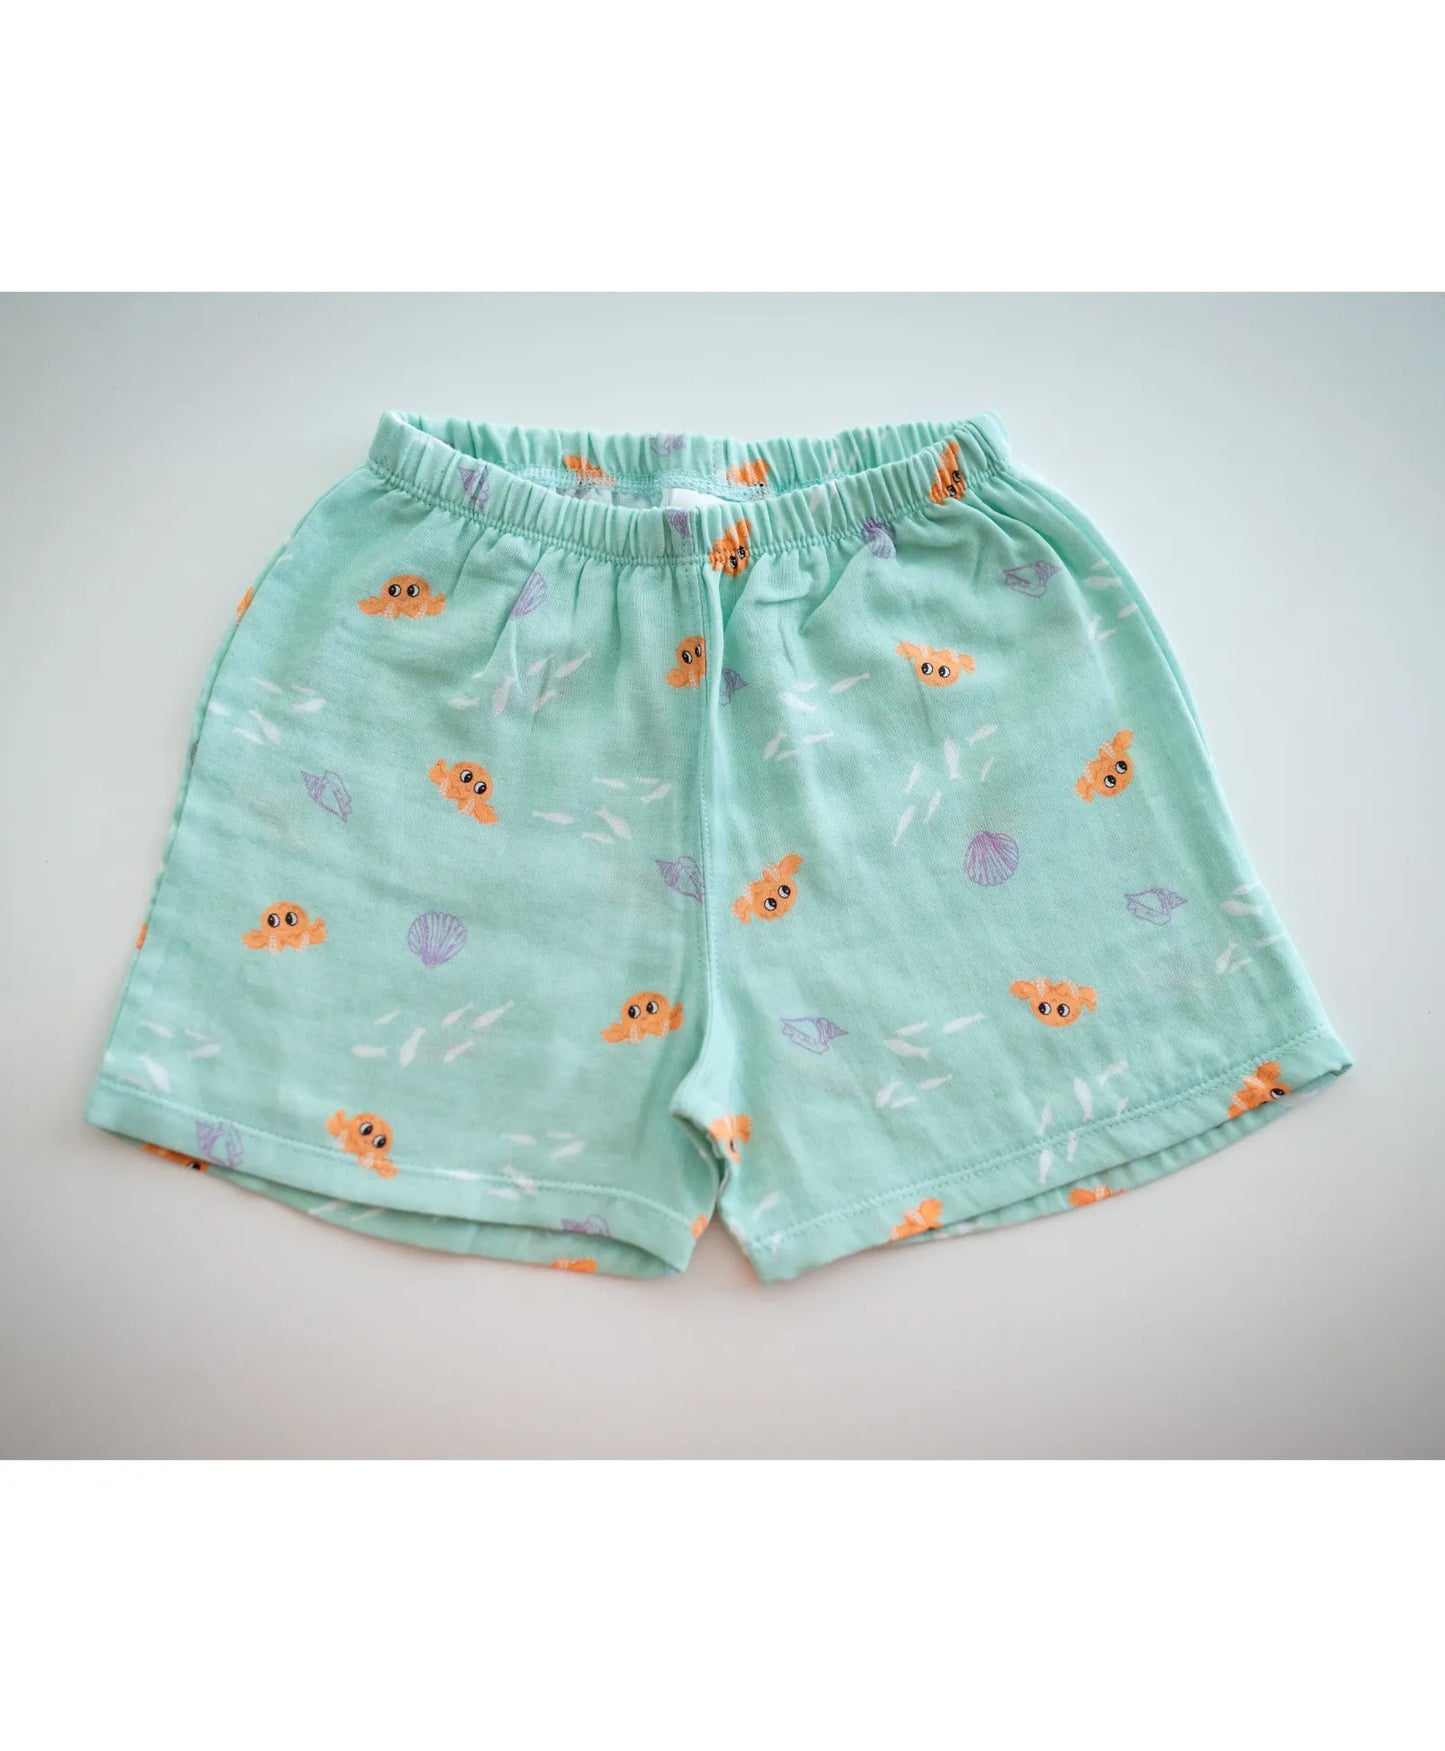 Tickle Tickle Organic Muslin Shorts and Tee Set - Lil Octy - Laadlee